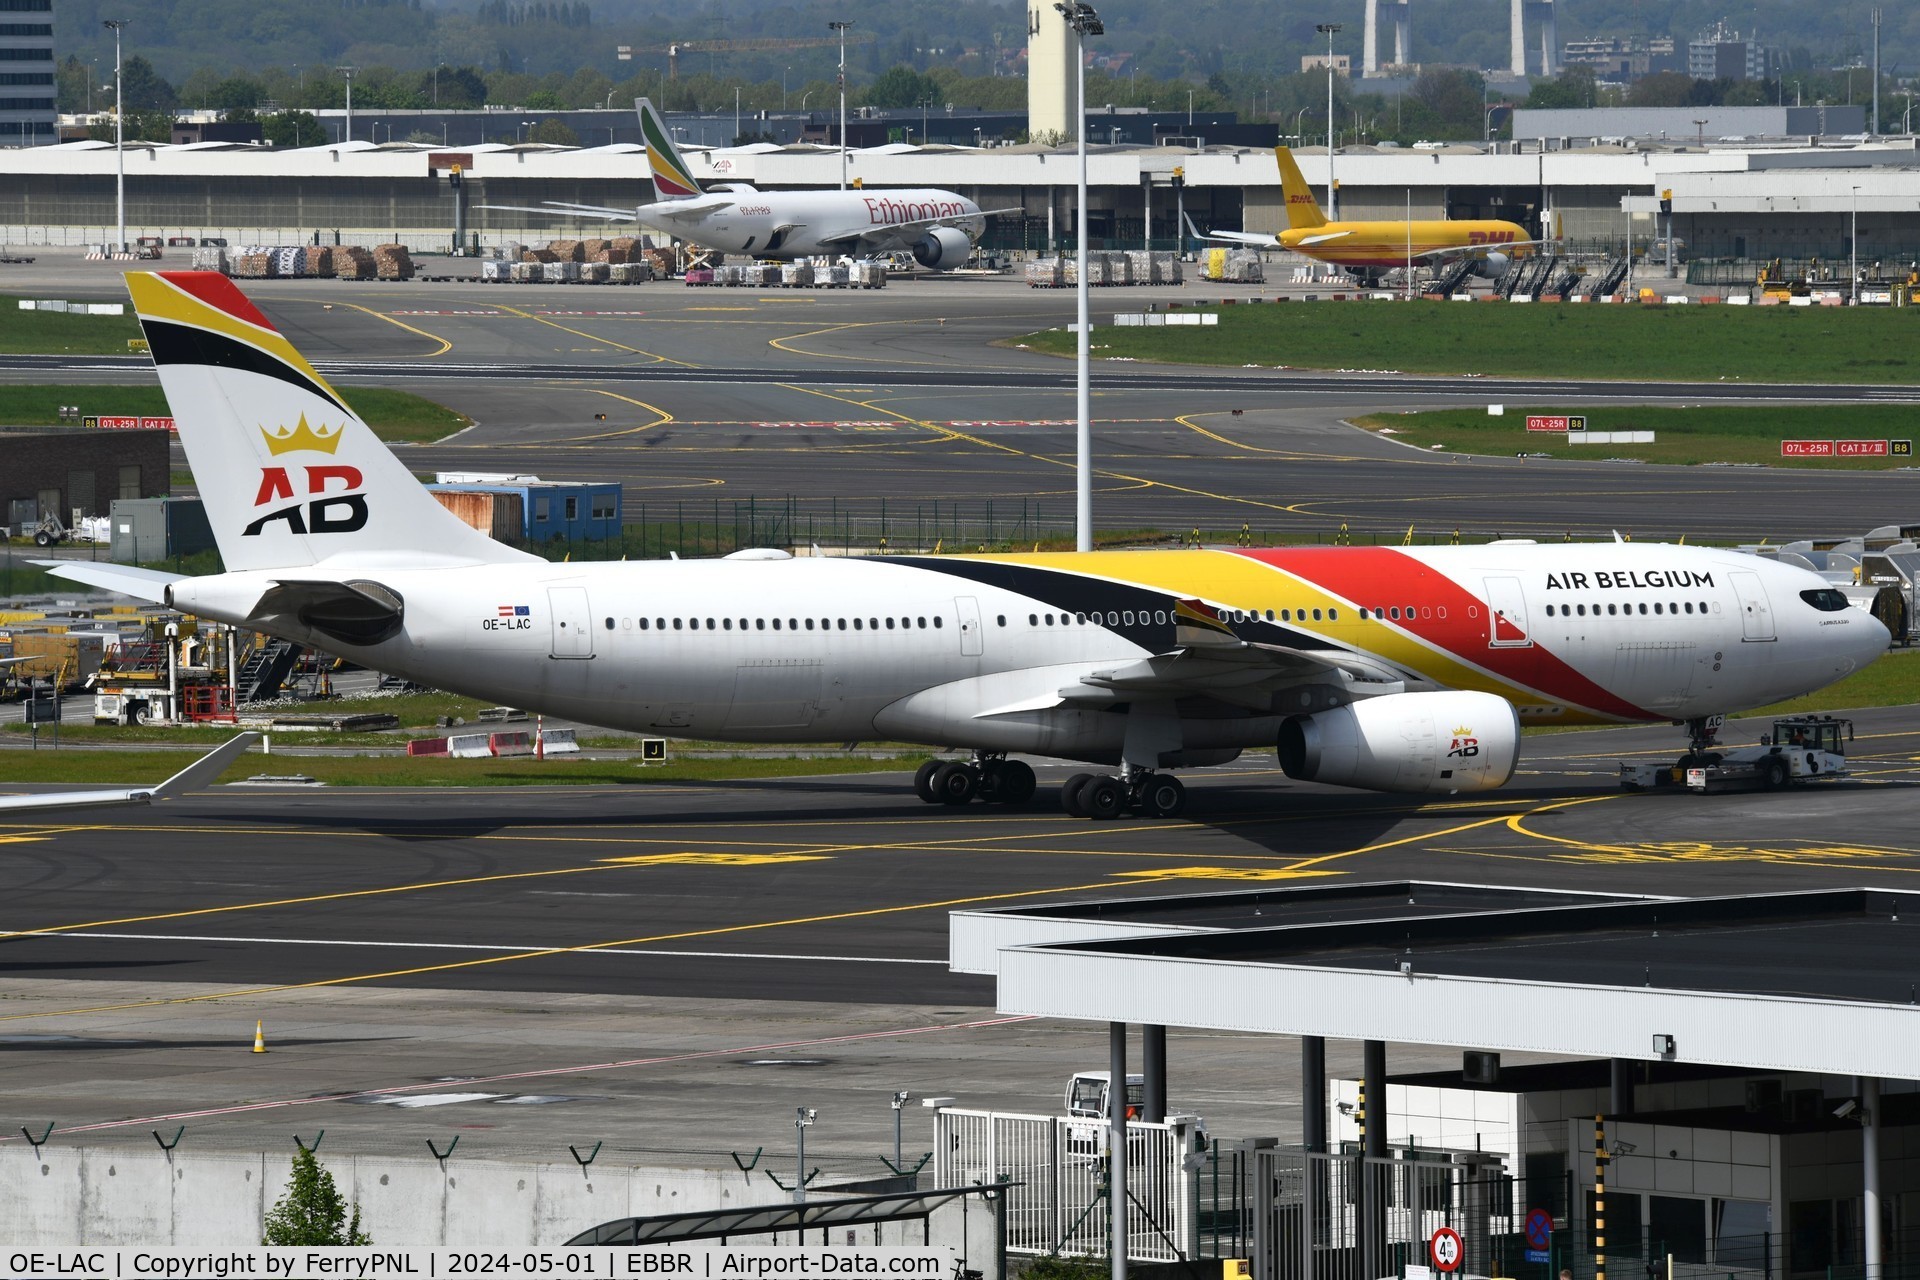 OE-LAC, 2013 Airbus A330-243 C/N 1486, Air Belgium being towed to the maintenance area on the other side of the field